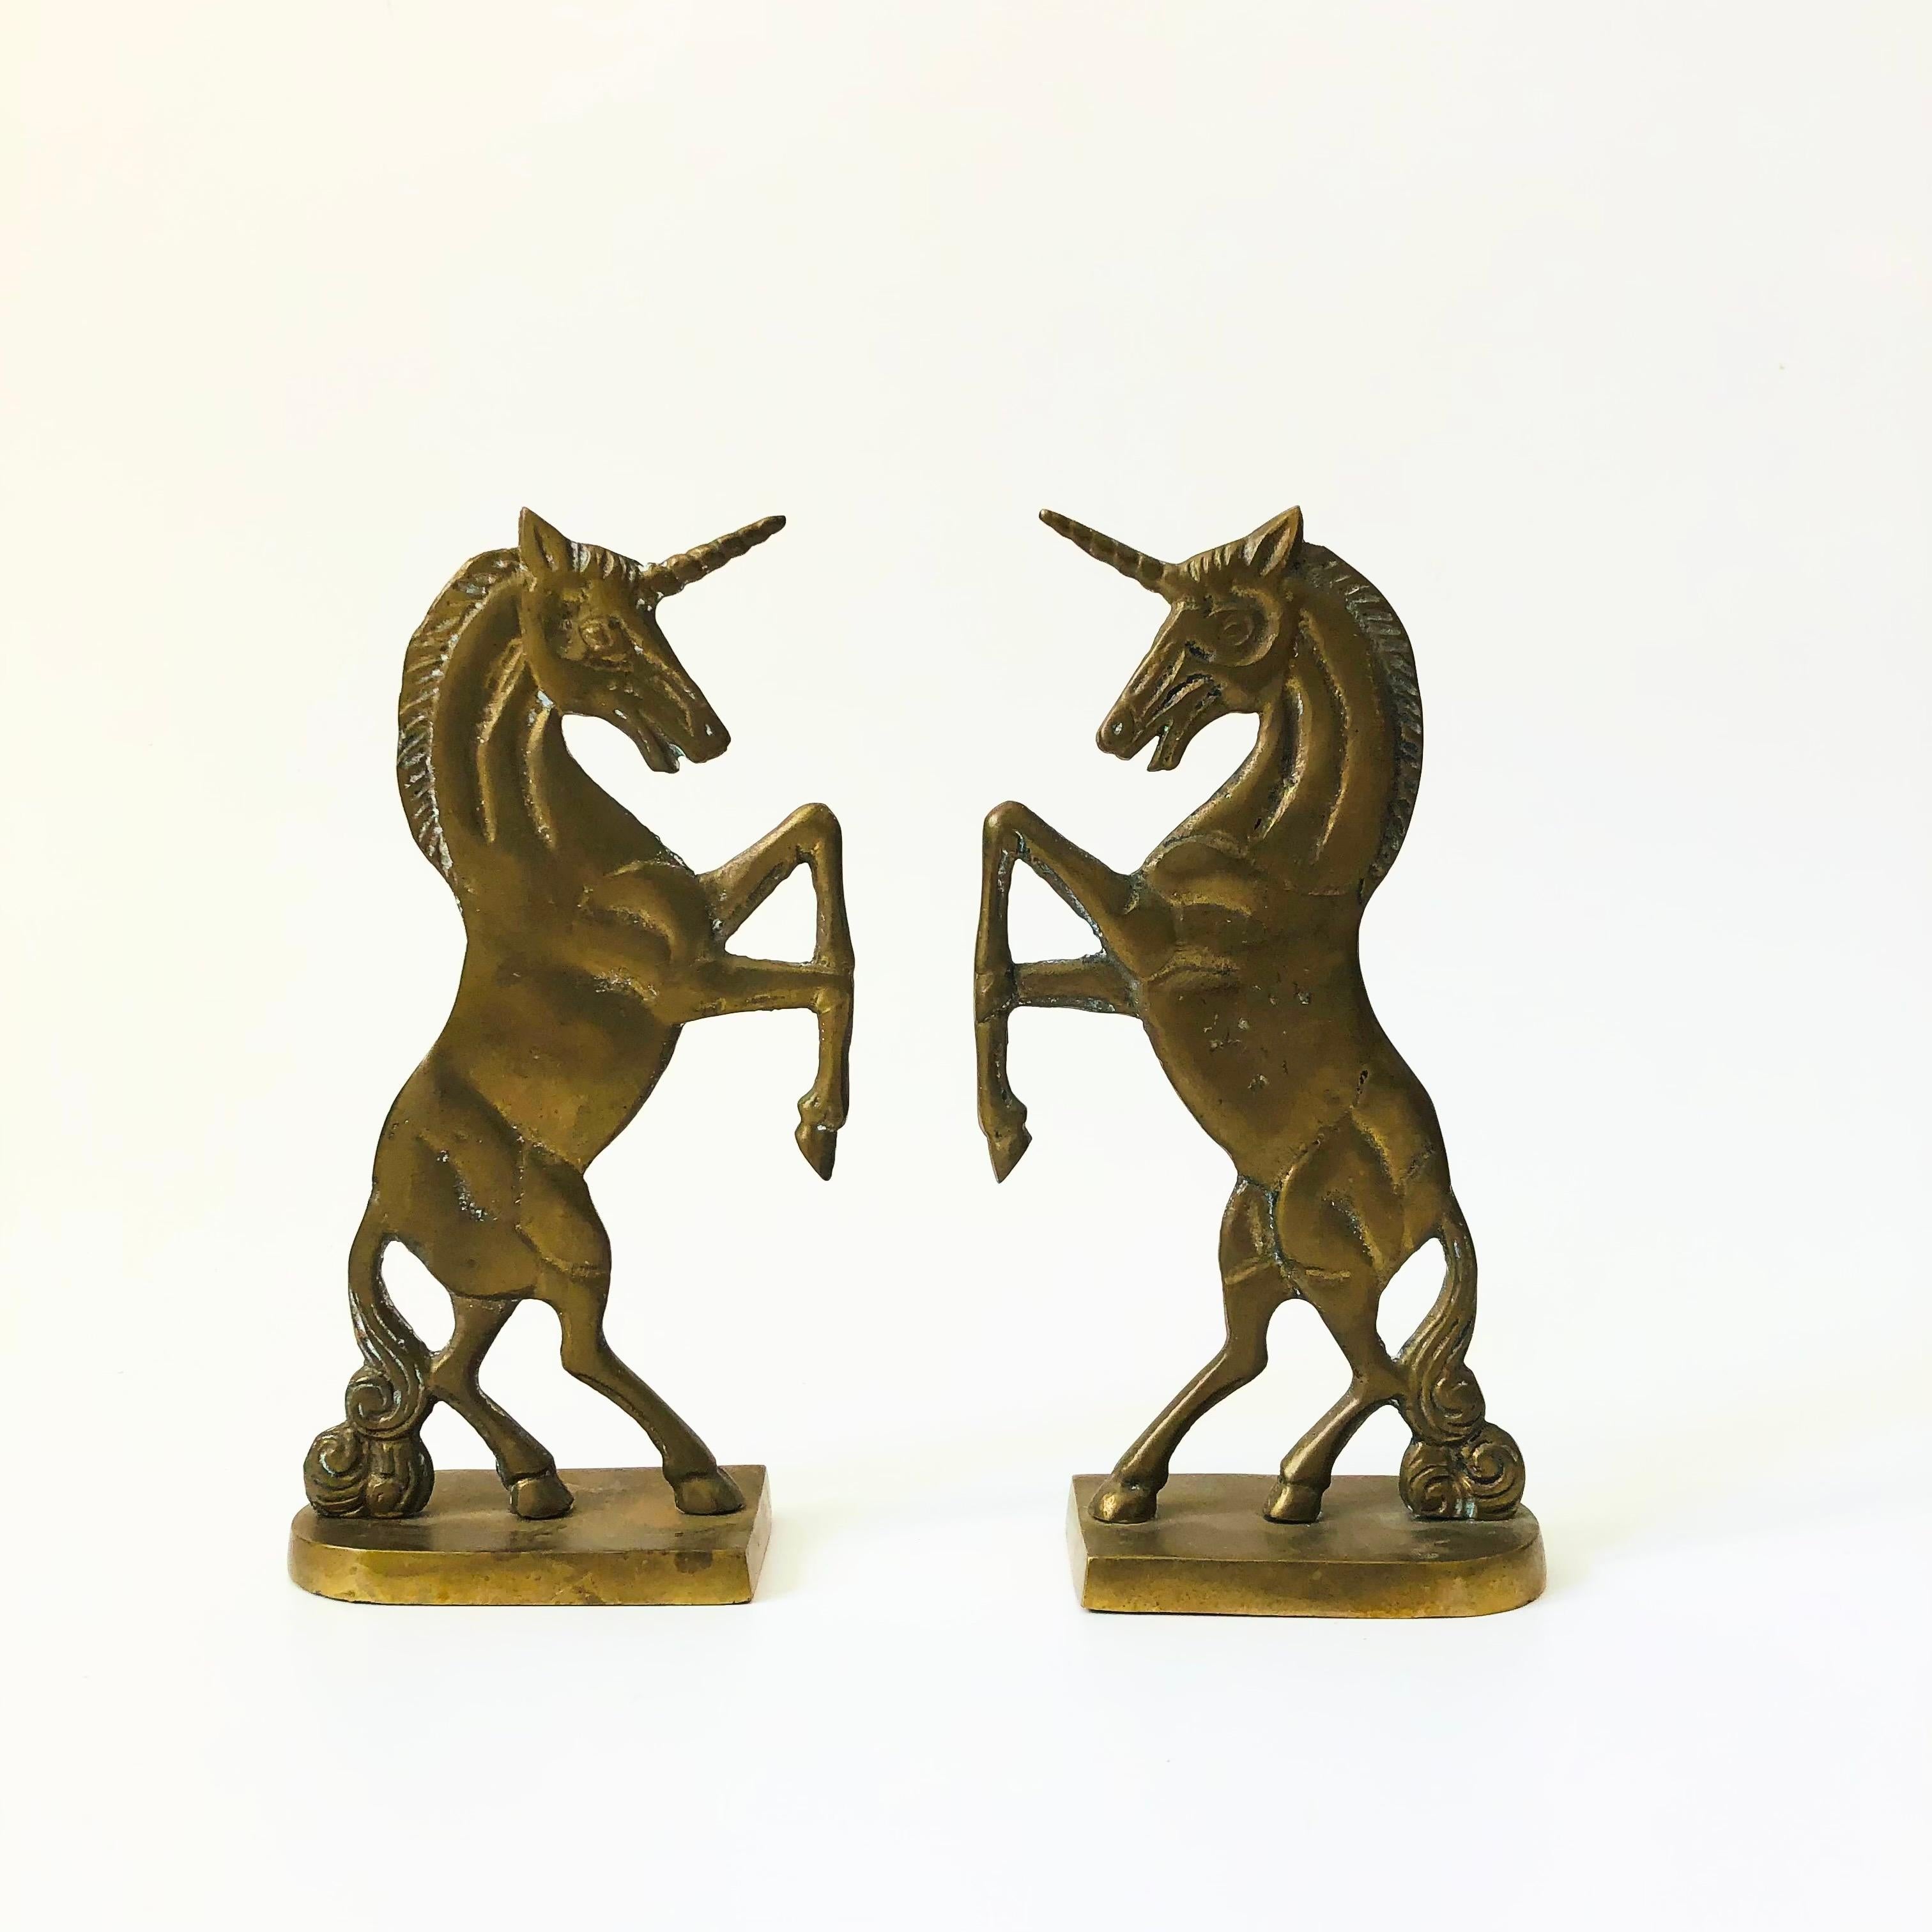 A wonderful pair of vintage brass bookends in the shape of unicorns.

